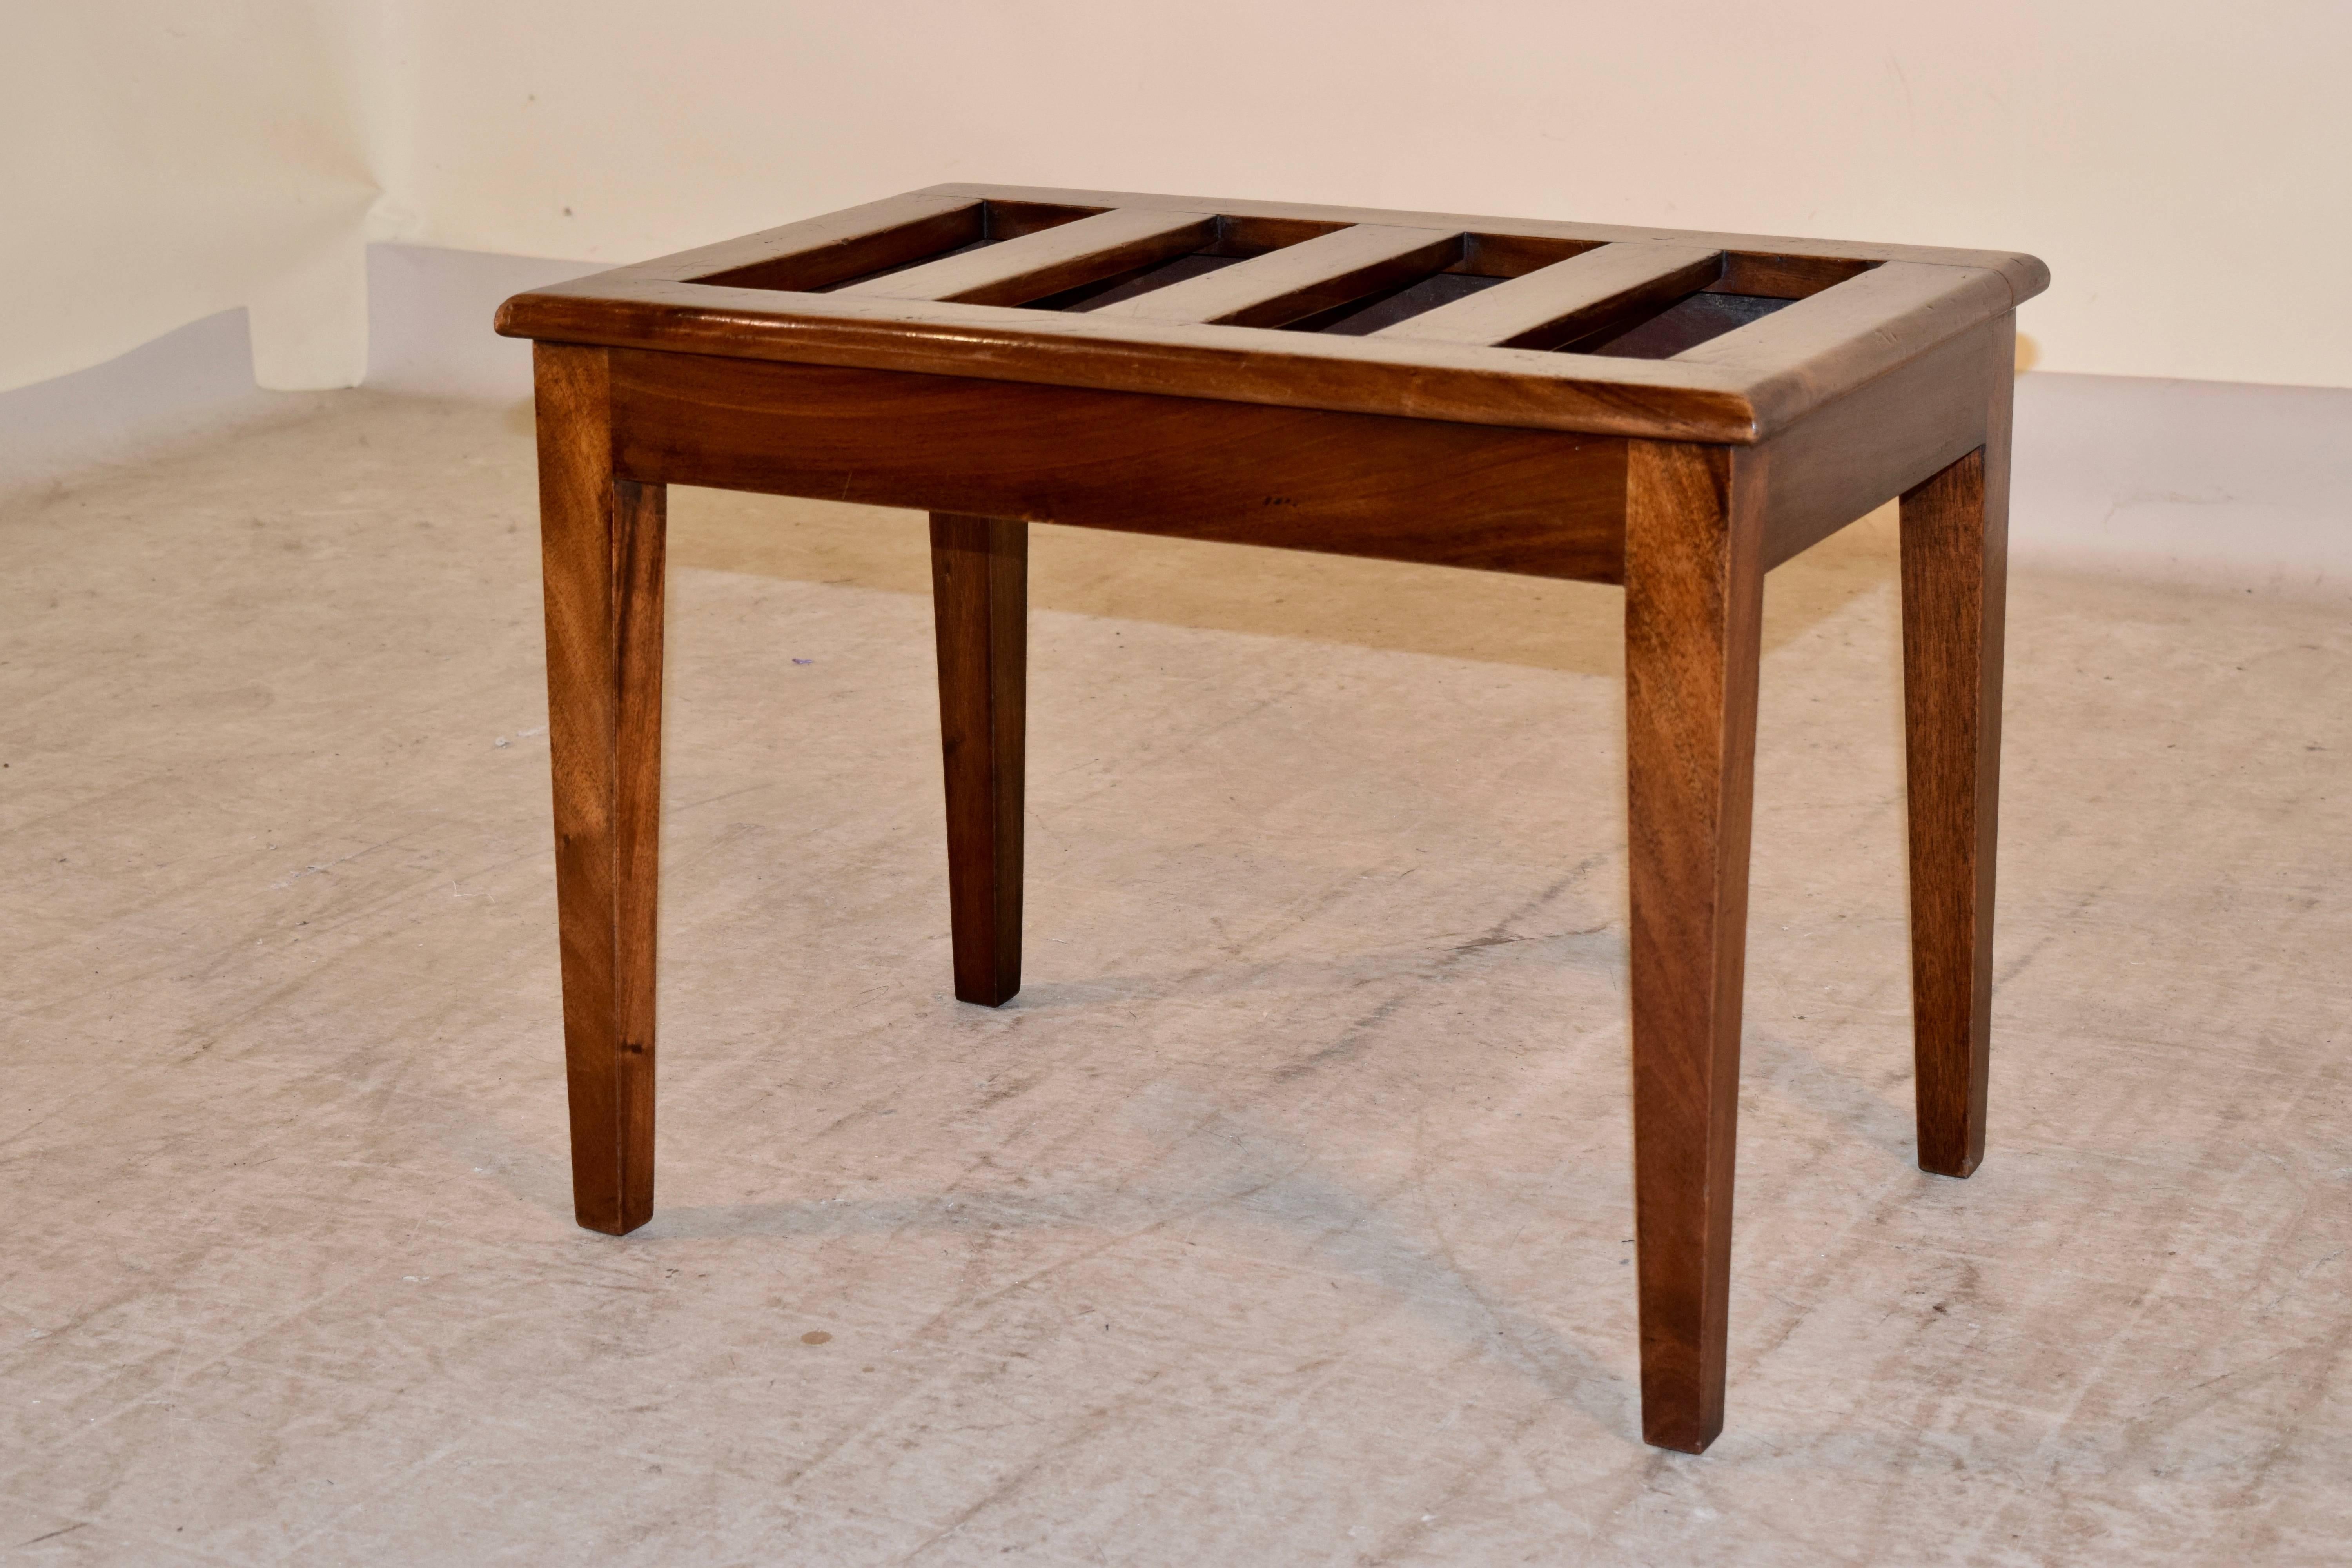 19th century English luggage stand made from mahogany. The stand has very simple lines with a slatted top and tapered legs.